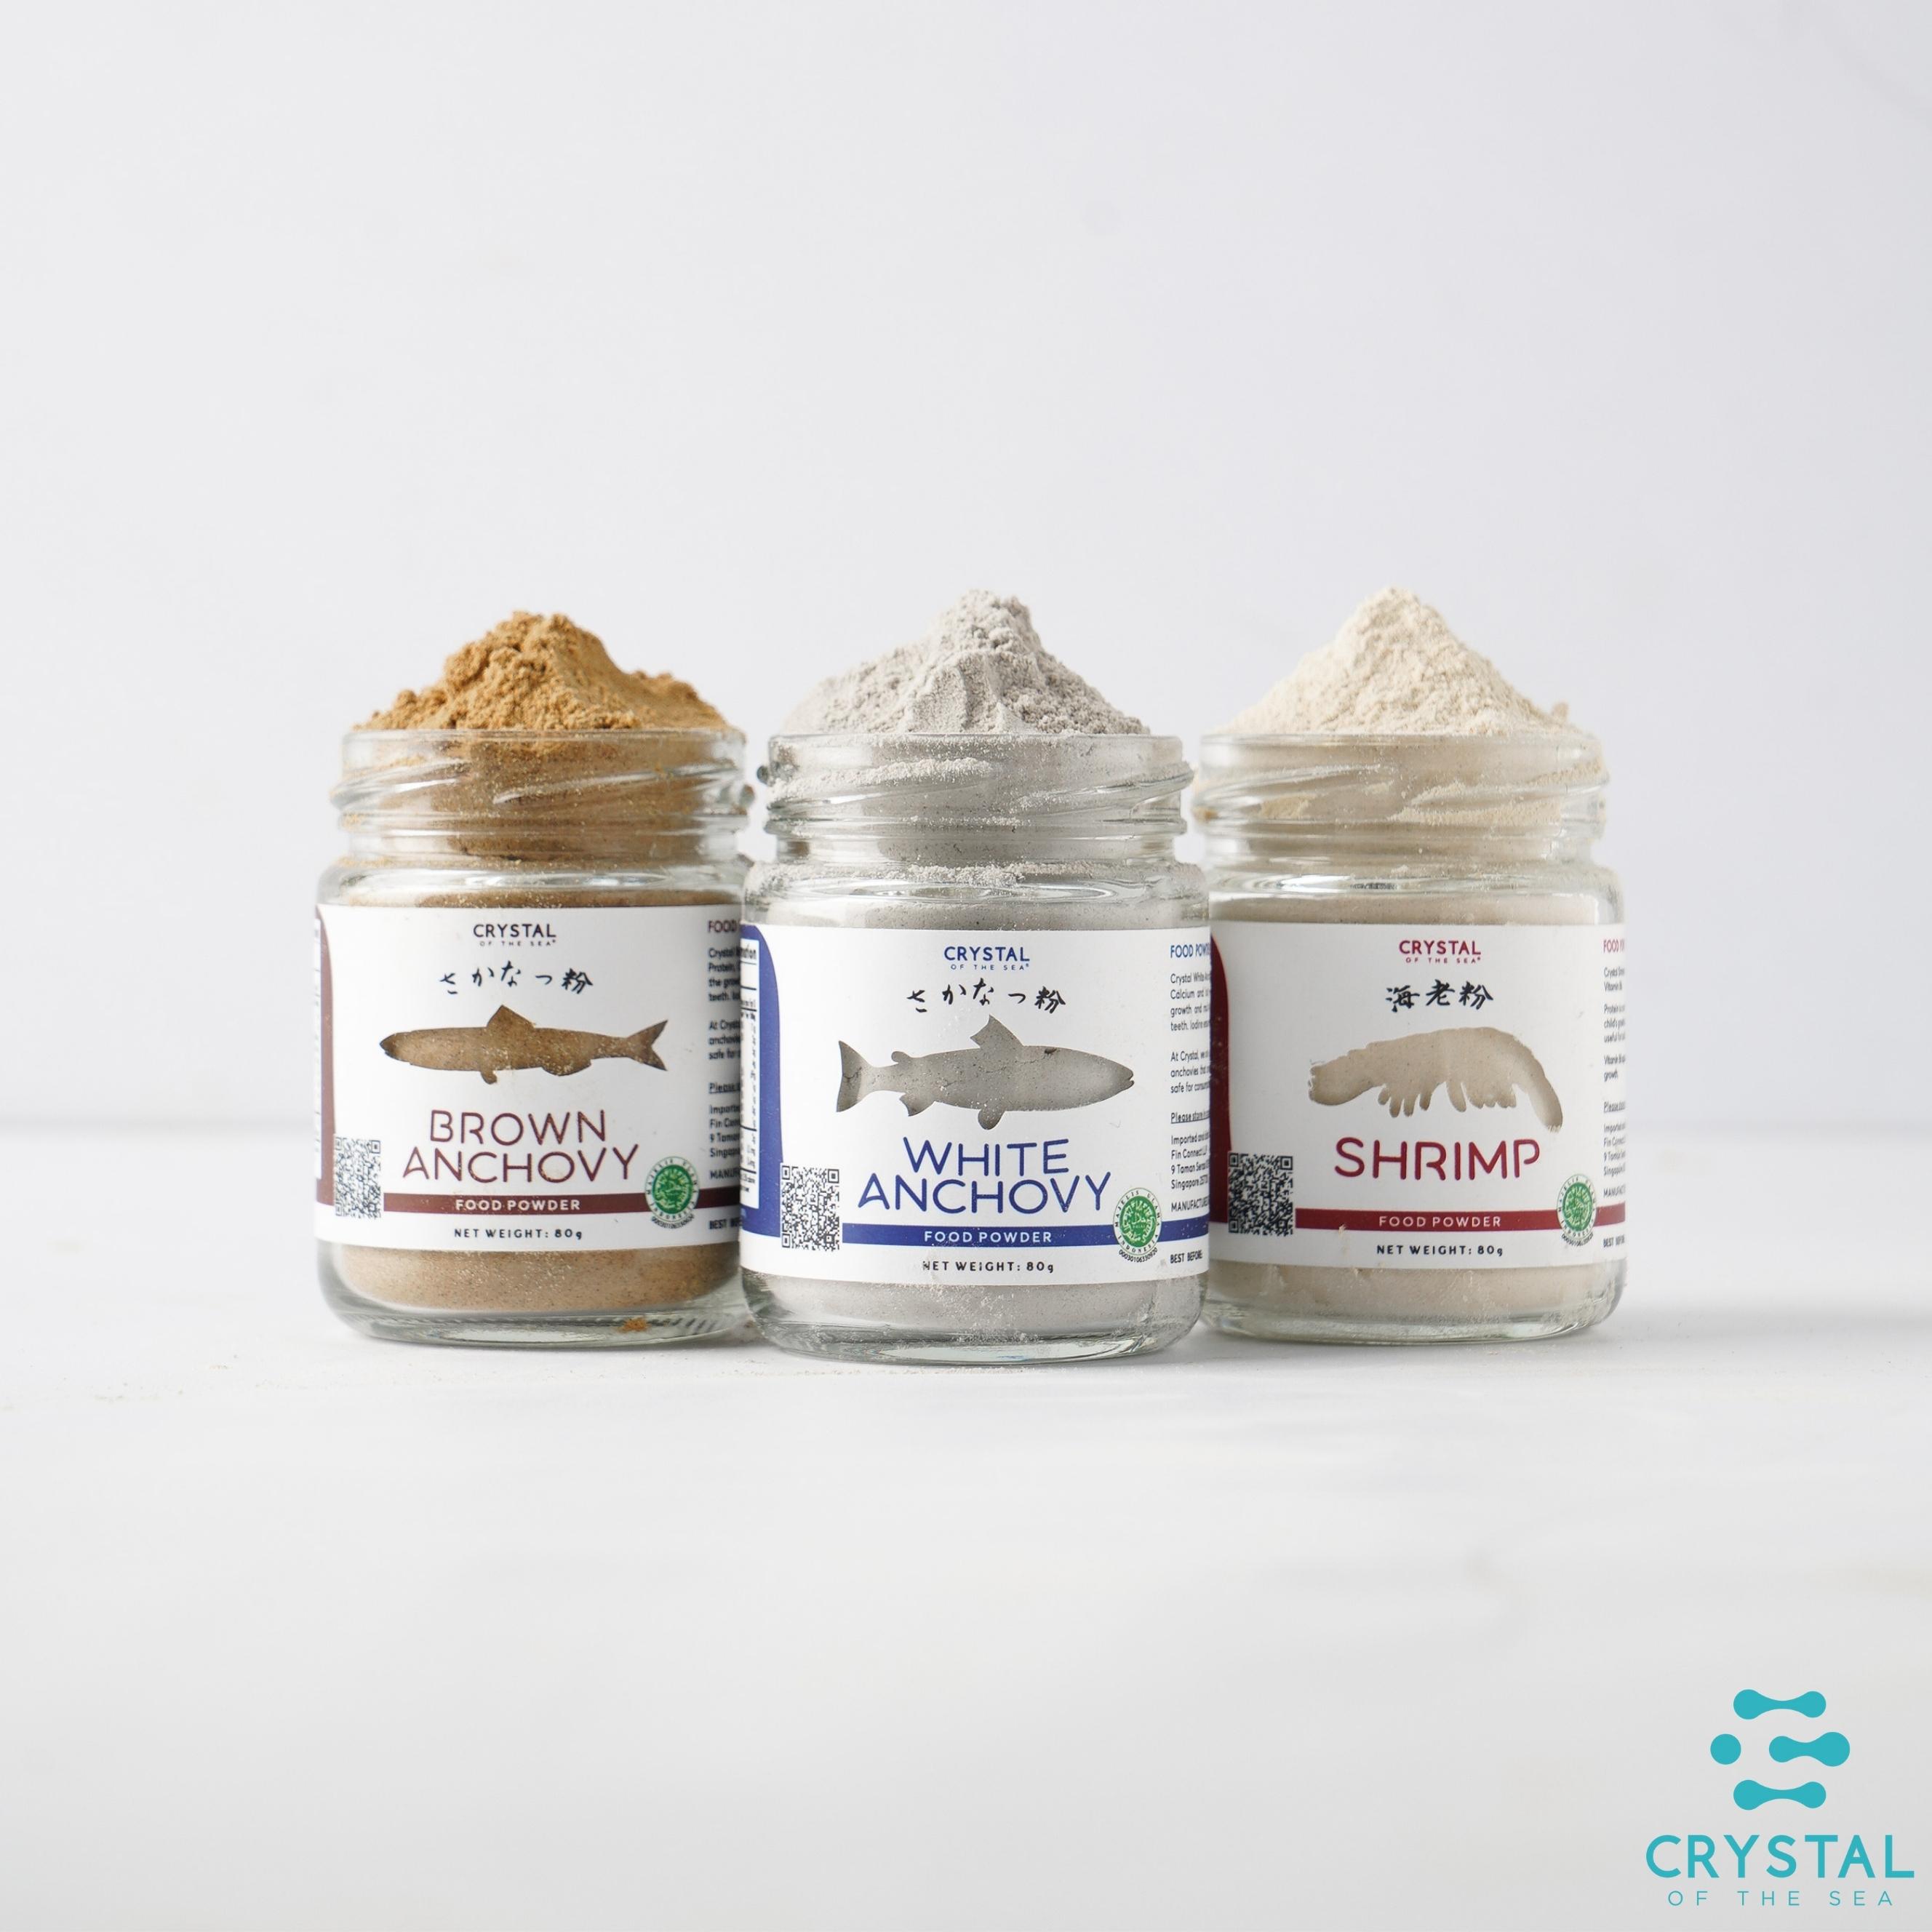 Crystal of the Sea - (Set of 3 Jar x 80g) White Anchovy + Brown Anchovy + Shrimp Powder